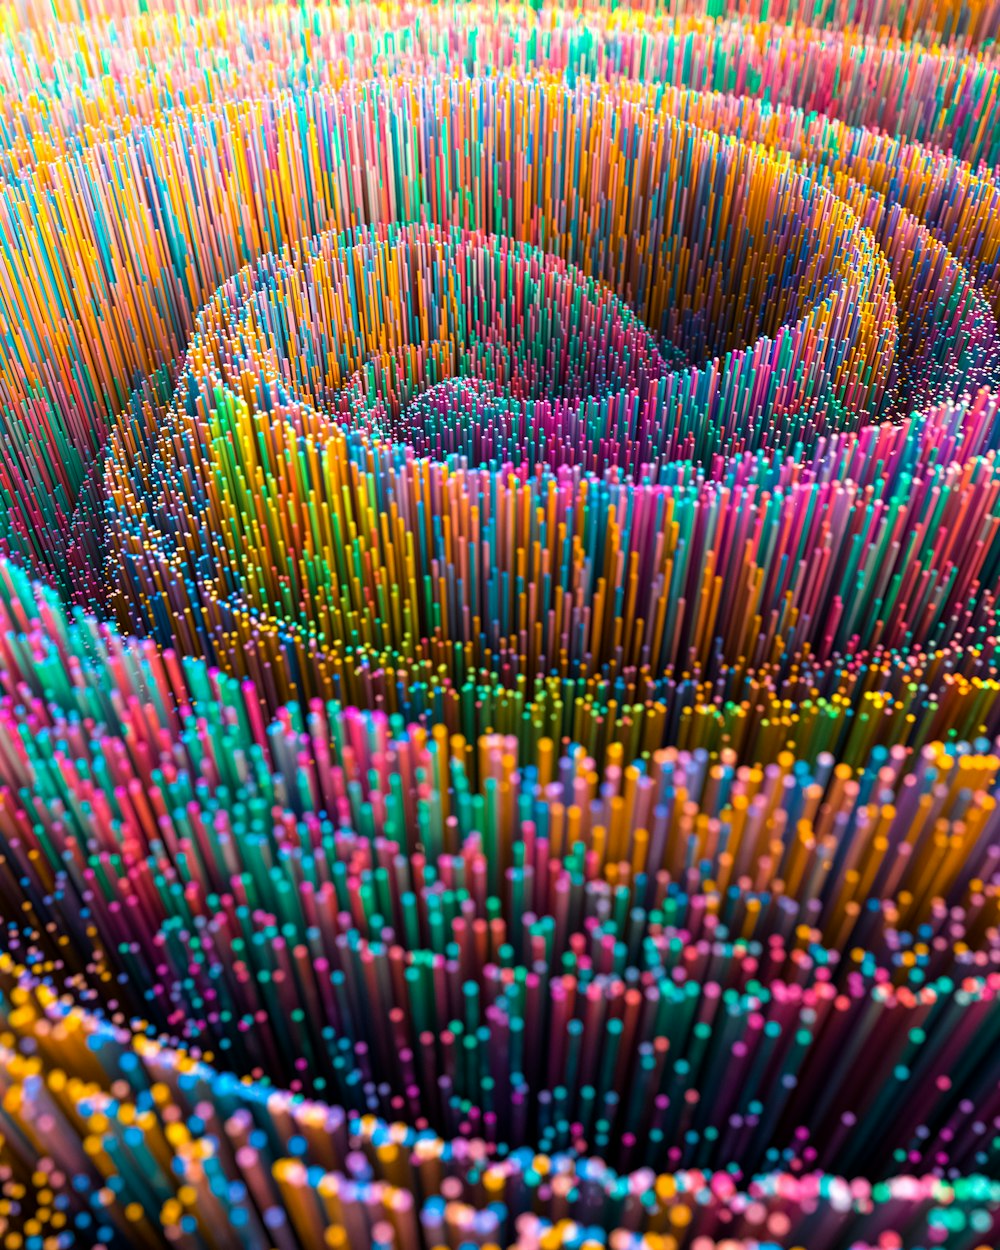 a large group of multicolored pencils are arranged in a spiral